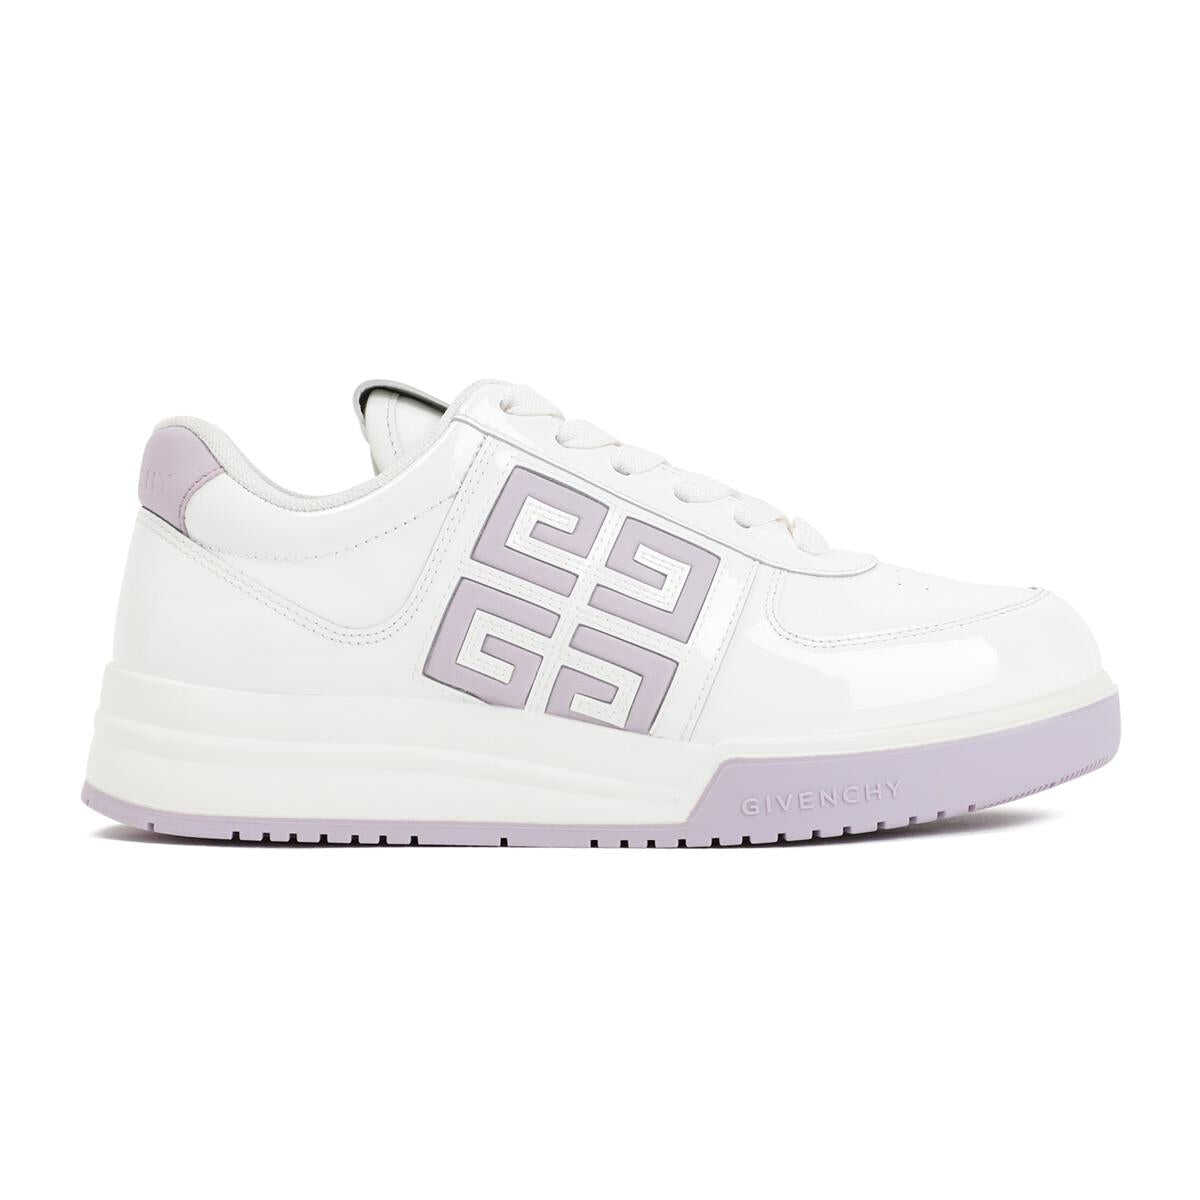 Givenchy GIVENCHY G4 LOW-TOP SNEAKERS SHOES WHITE